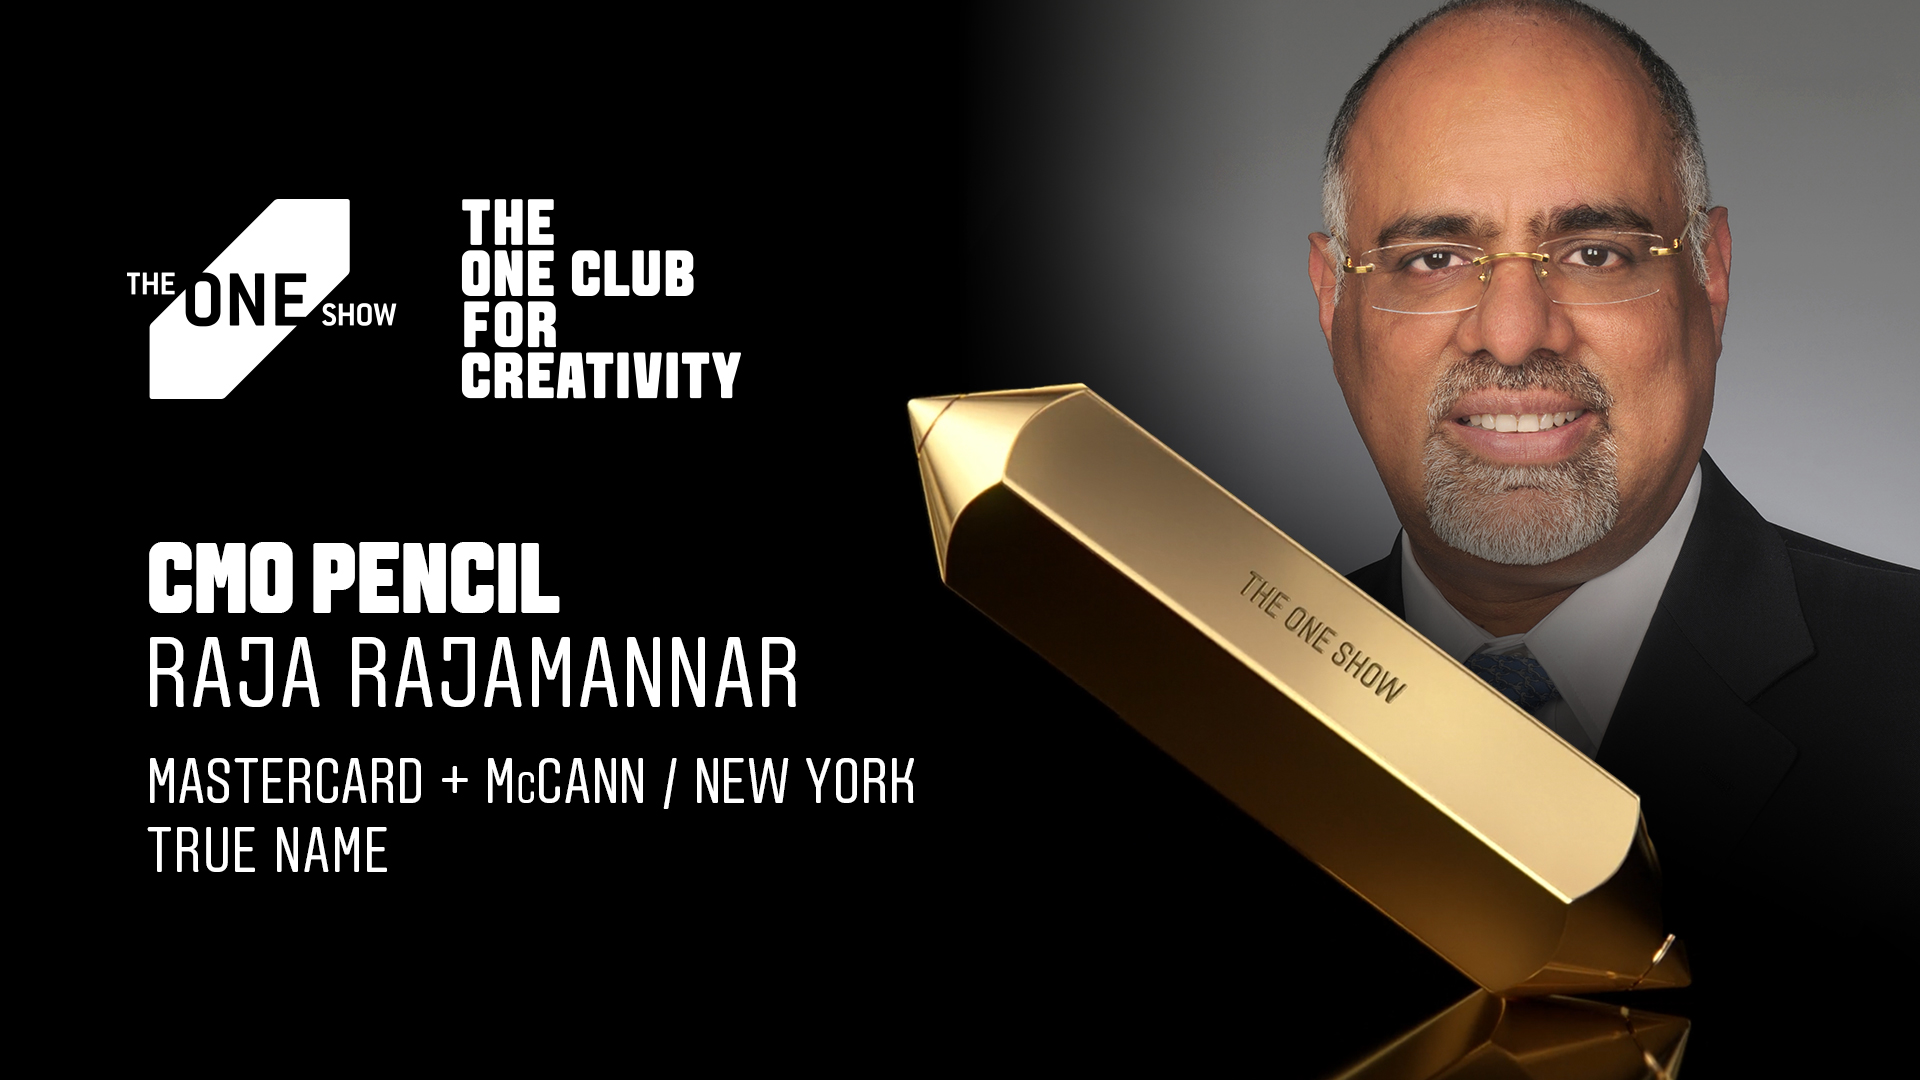 Mastercard’s Raja Rajamannar Wins The One Show 2021 CMO Pencil For 'True Name' by McCann NY